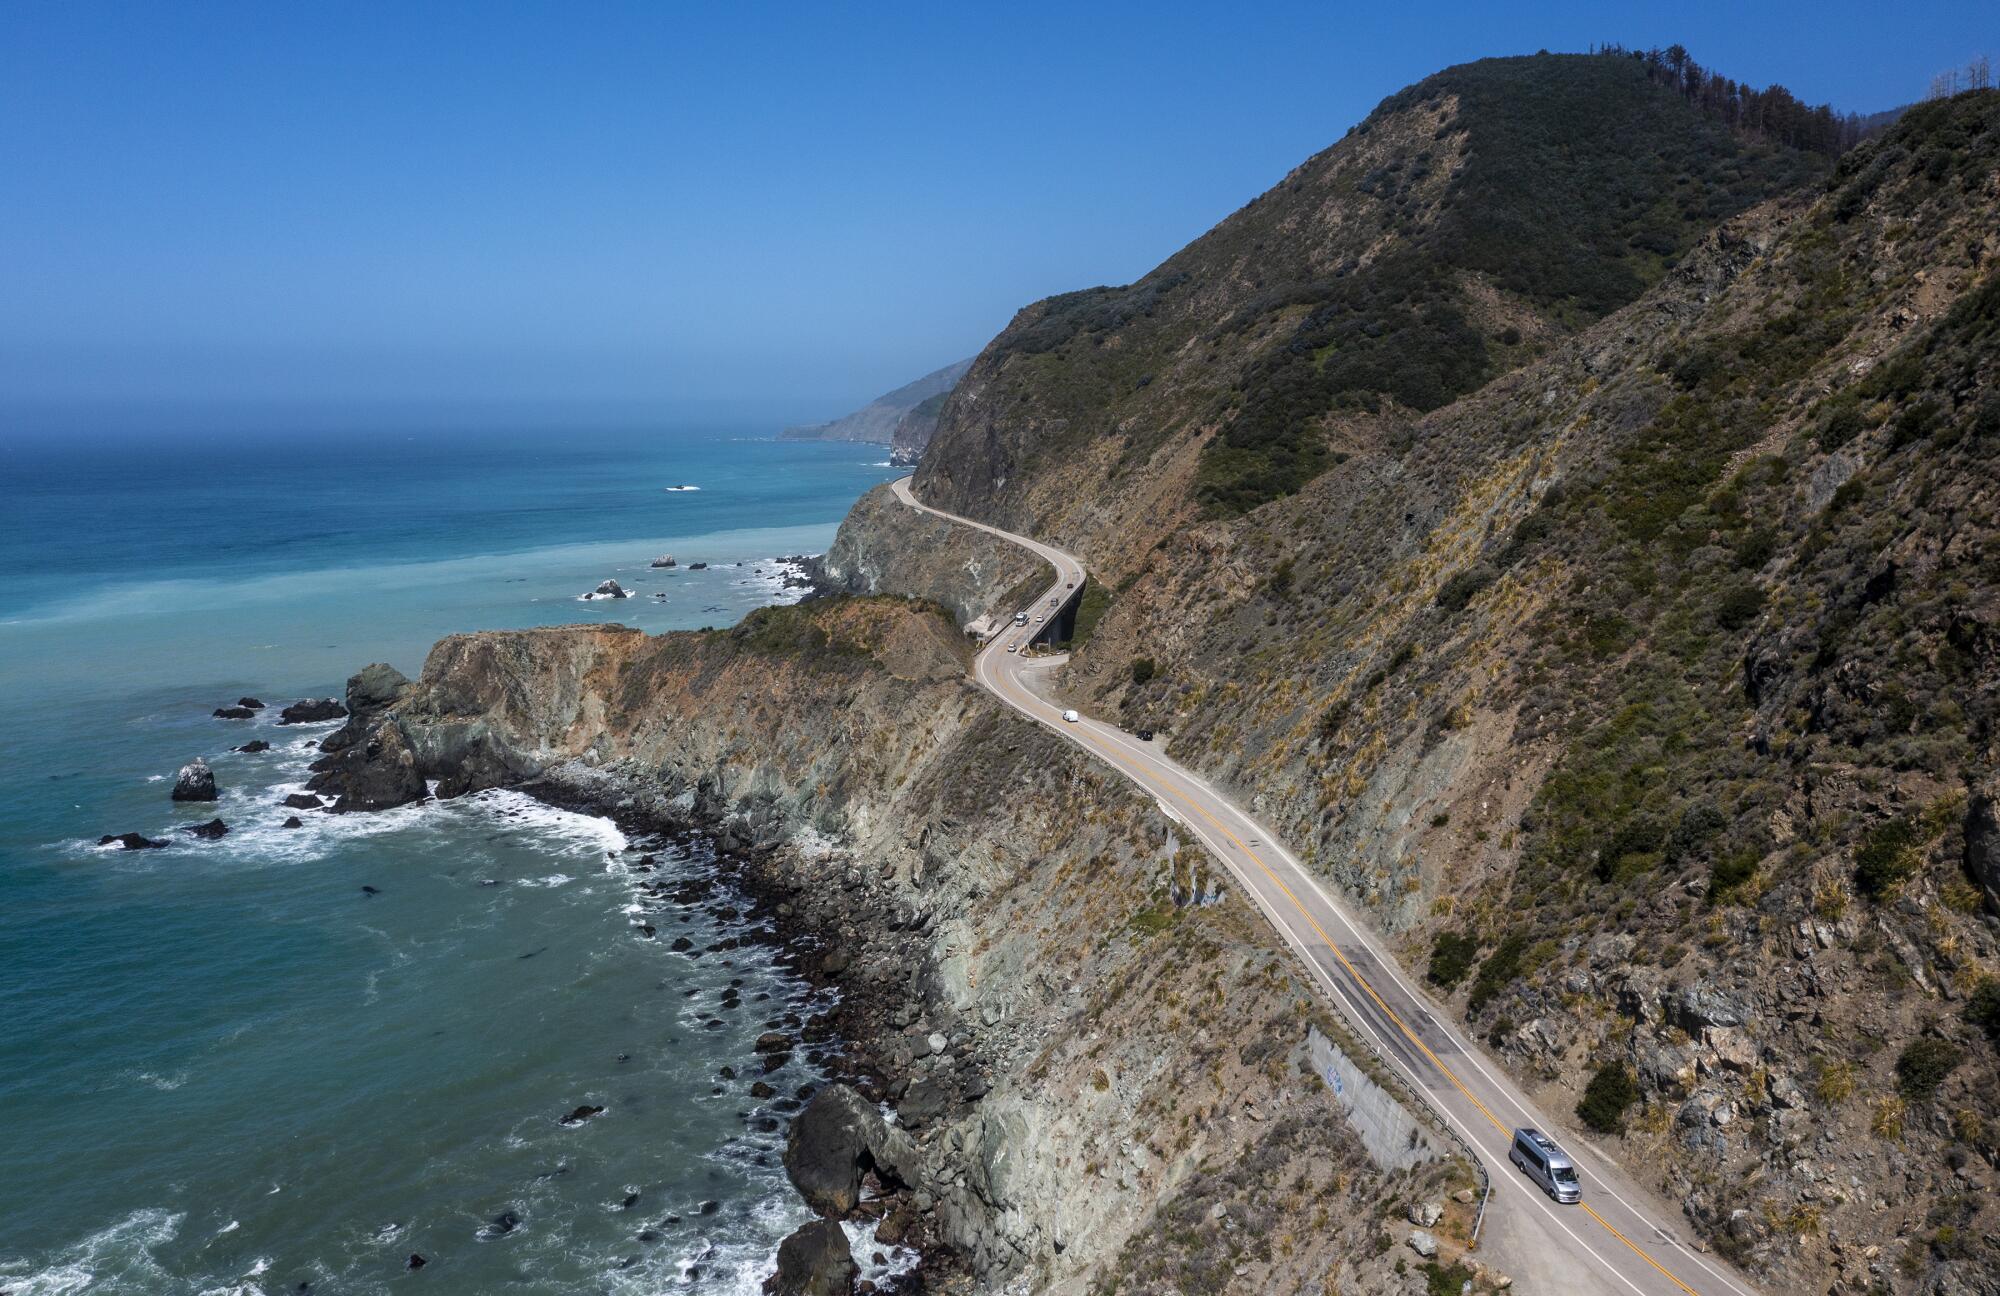 An aerial view shows a two-lane roadway between steep hills and an expanse of ocean.